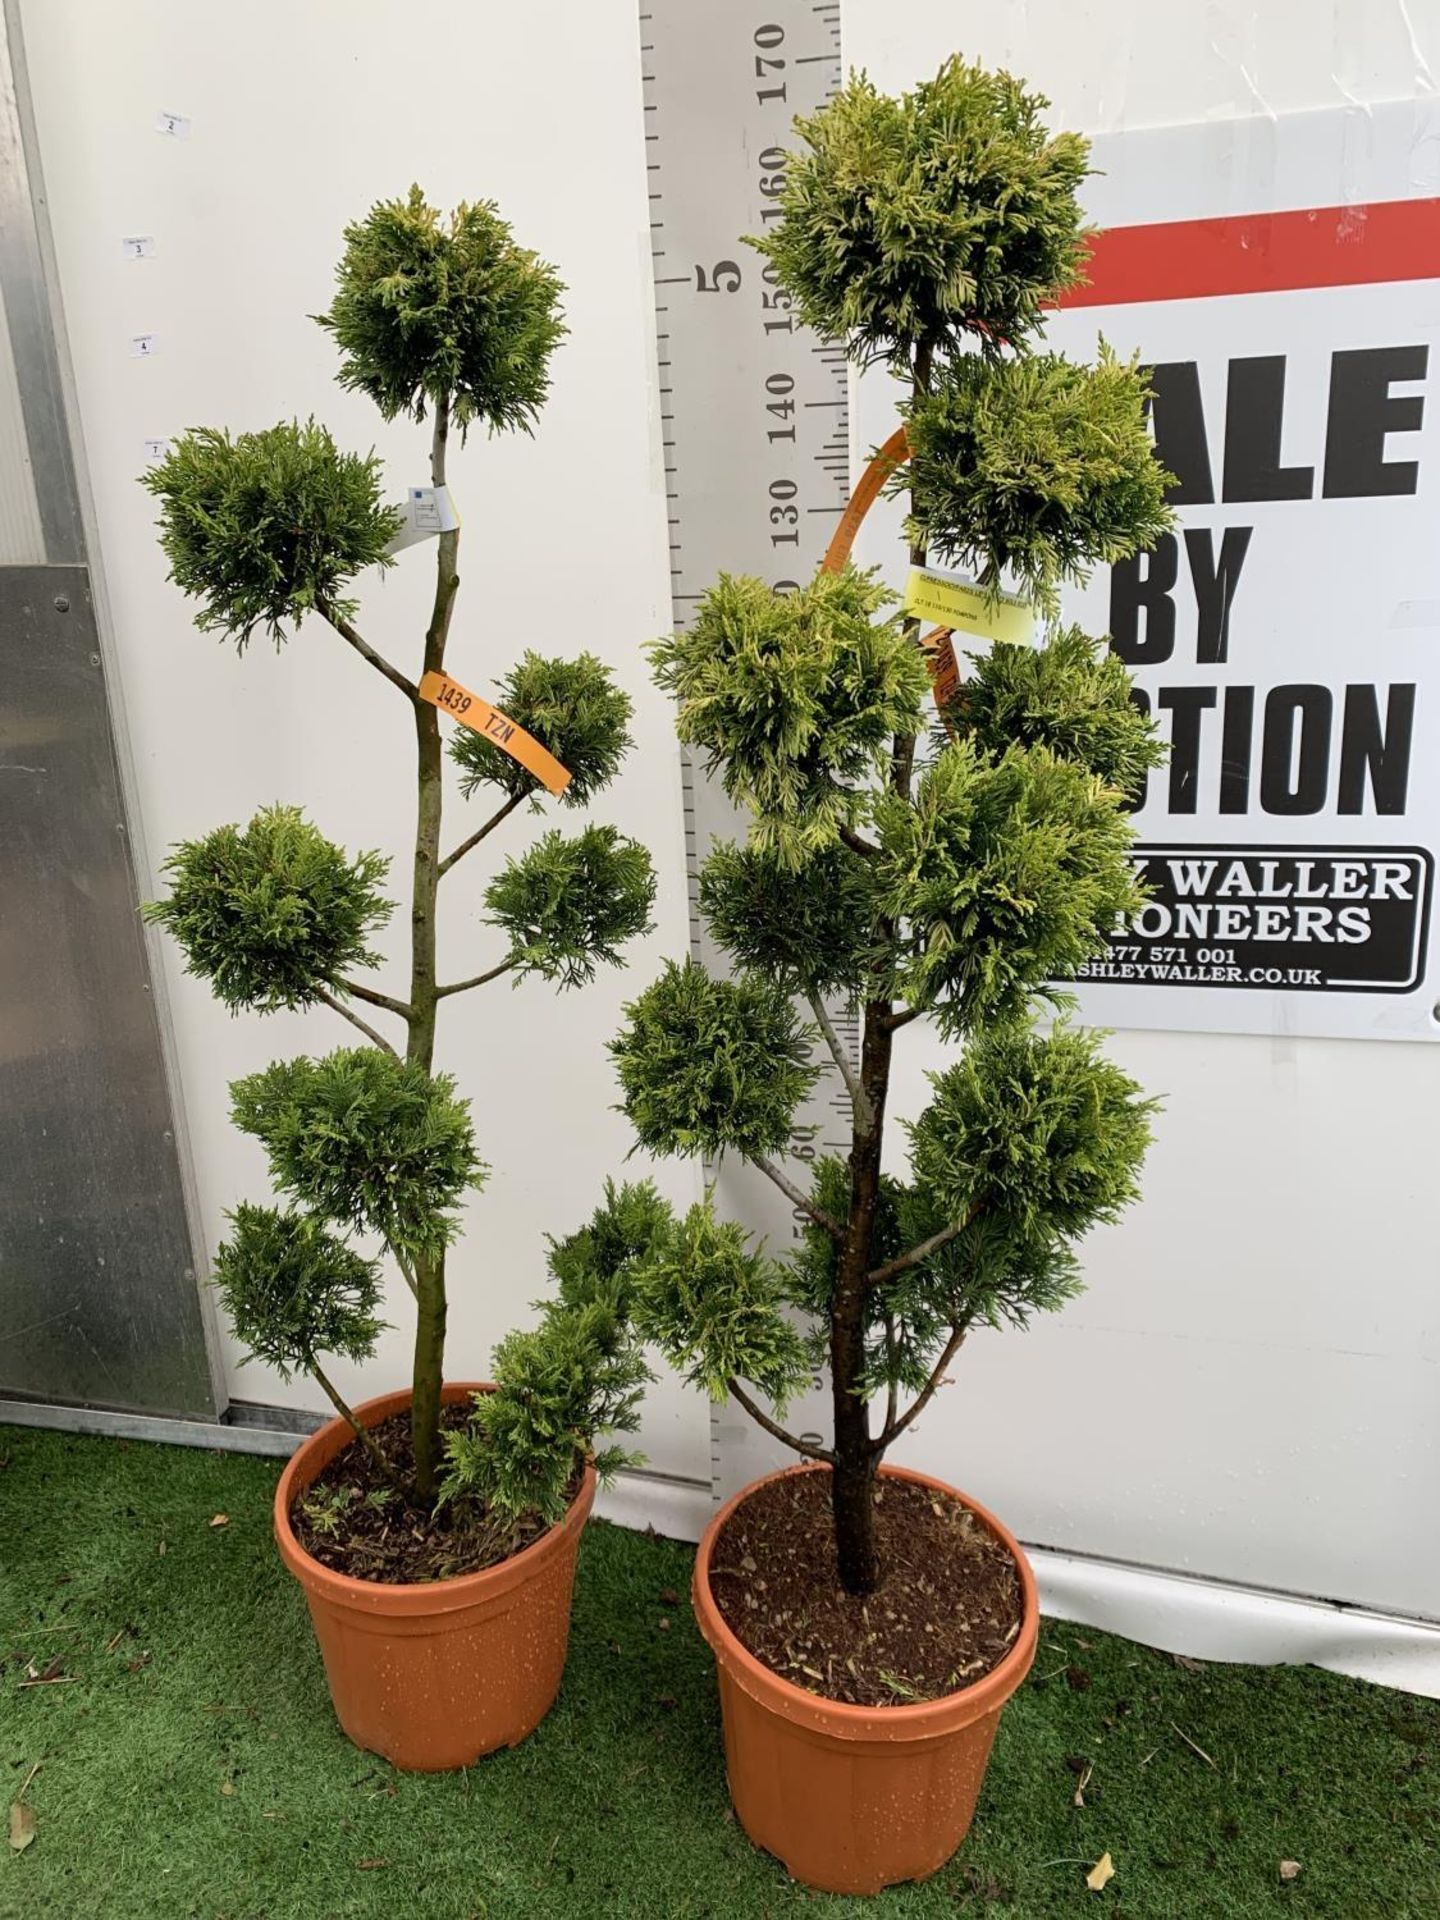 TWO POM POM TREES CUPRESSOCYPARIS LEYLANDII 'GOLD RIDER' APPROX 160CM IN HEIGHT IN 15 LTR POTS - Image 3 of 10